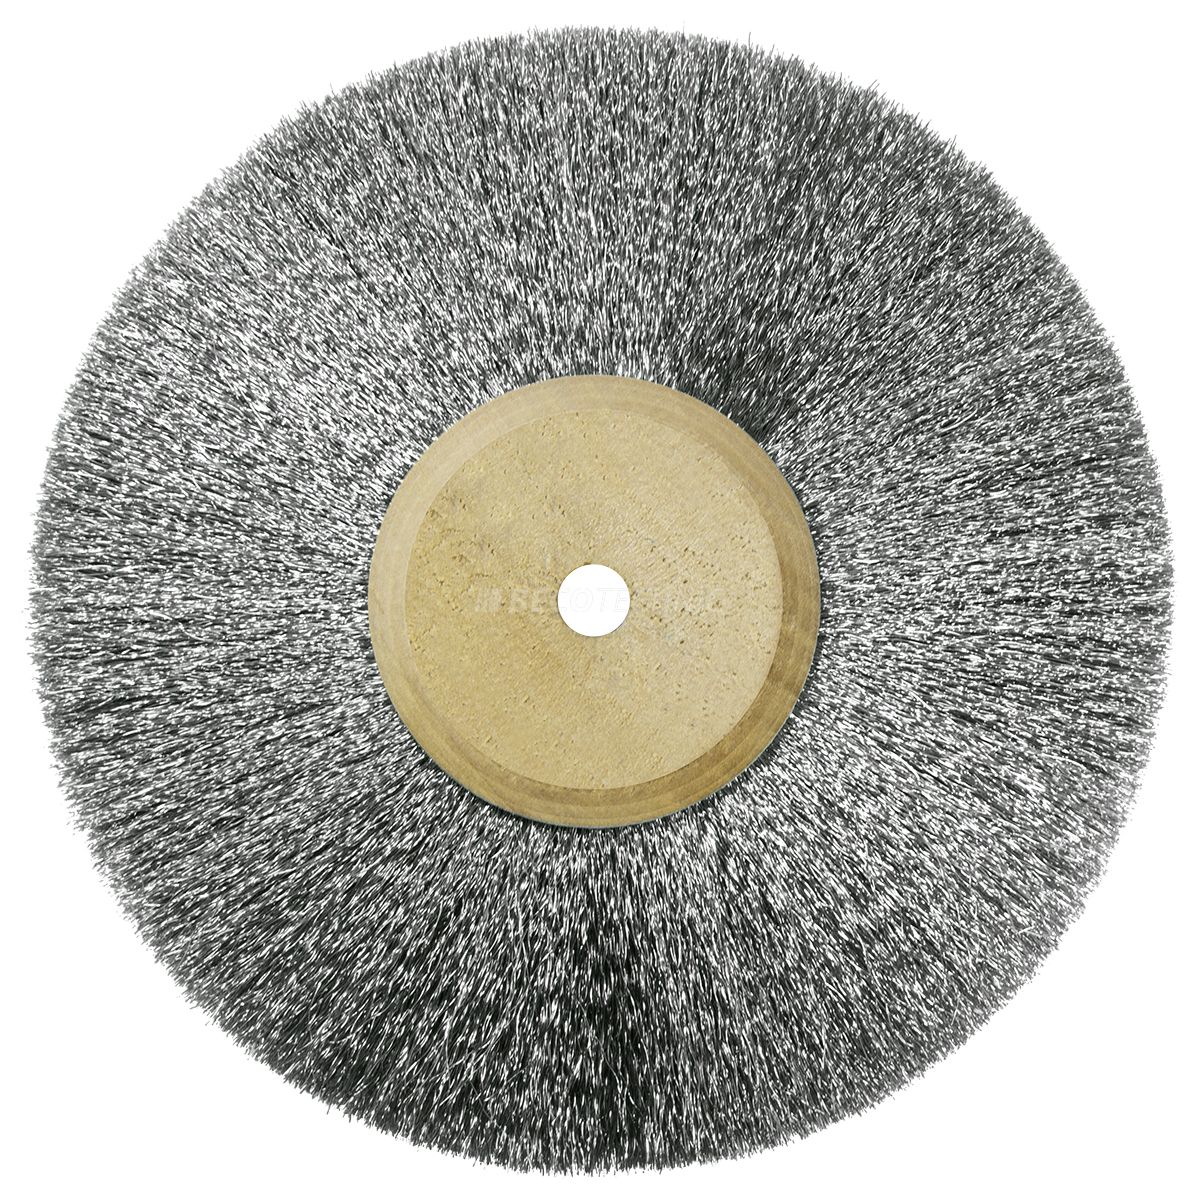 Circular brush, steel, Ø 100 mm, wire 0,1 mm, 4-row, with wooden core